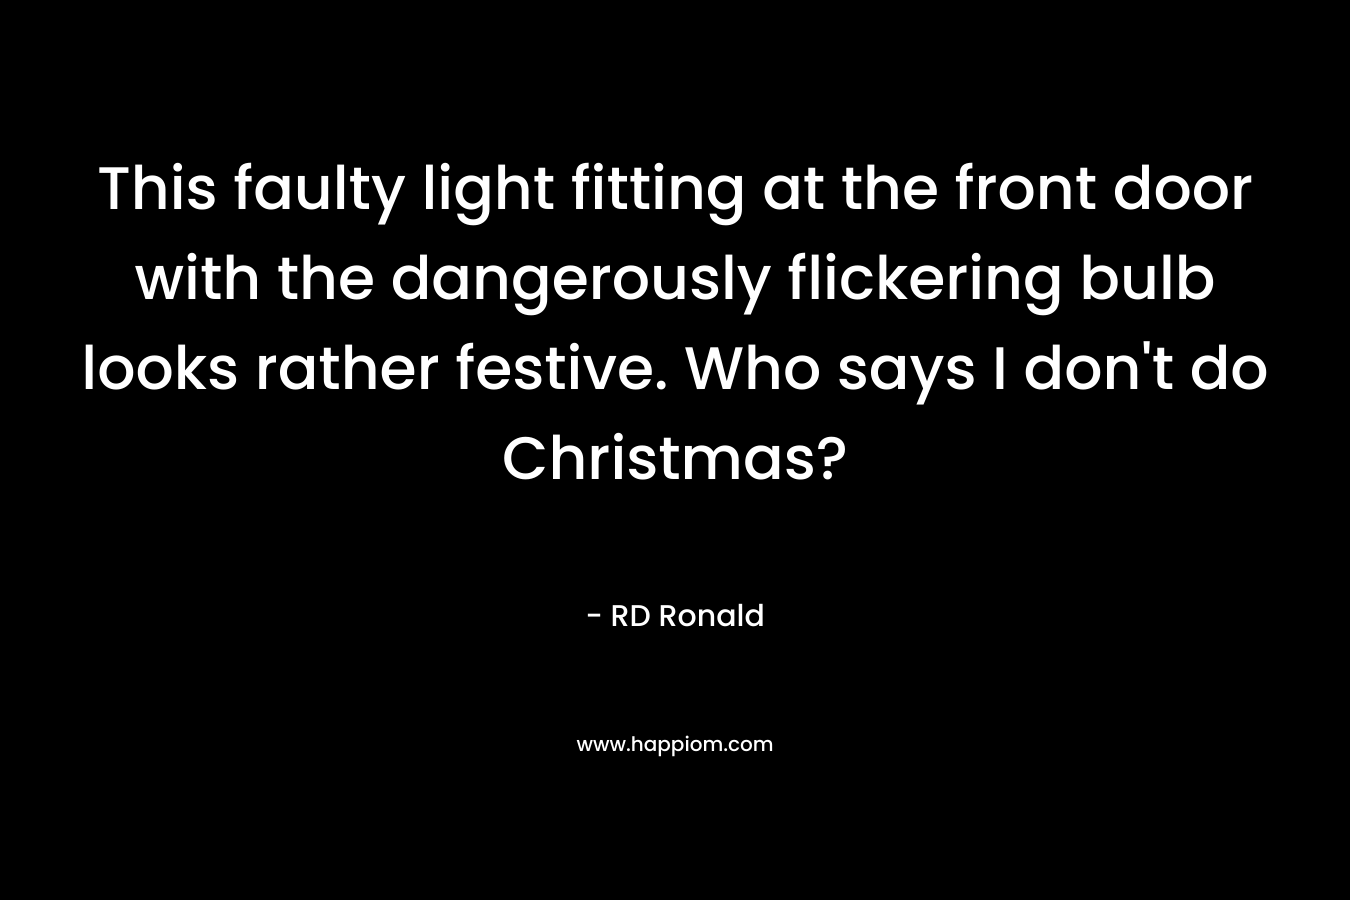 This faulty light fitting at the front door with the dangerously flickering bulb looks rather festive. Who says I don’t do Christmas? – RD Ronald